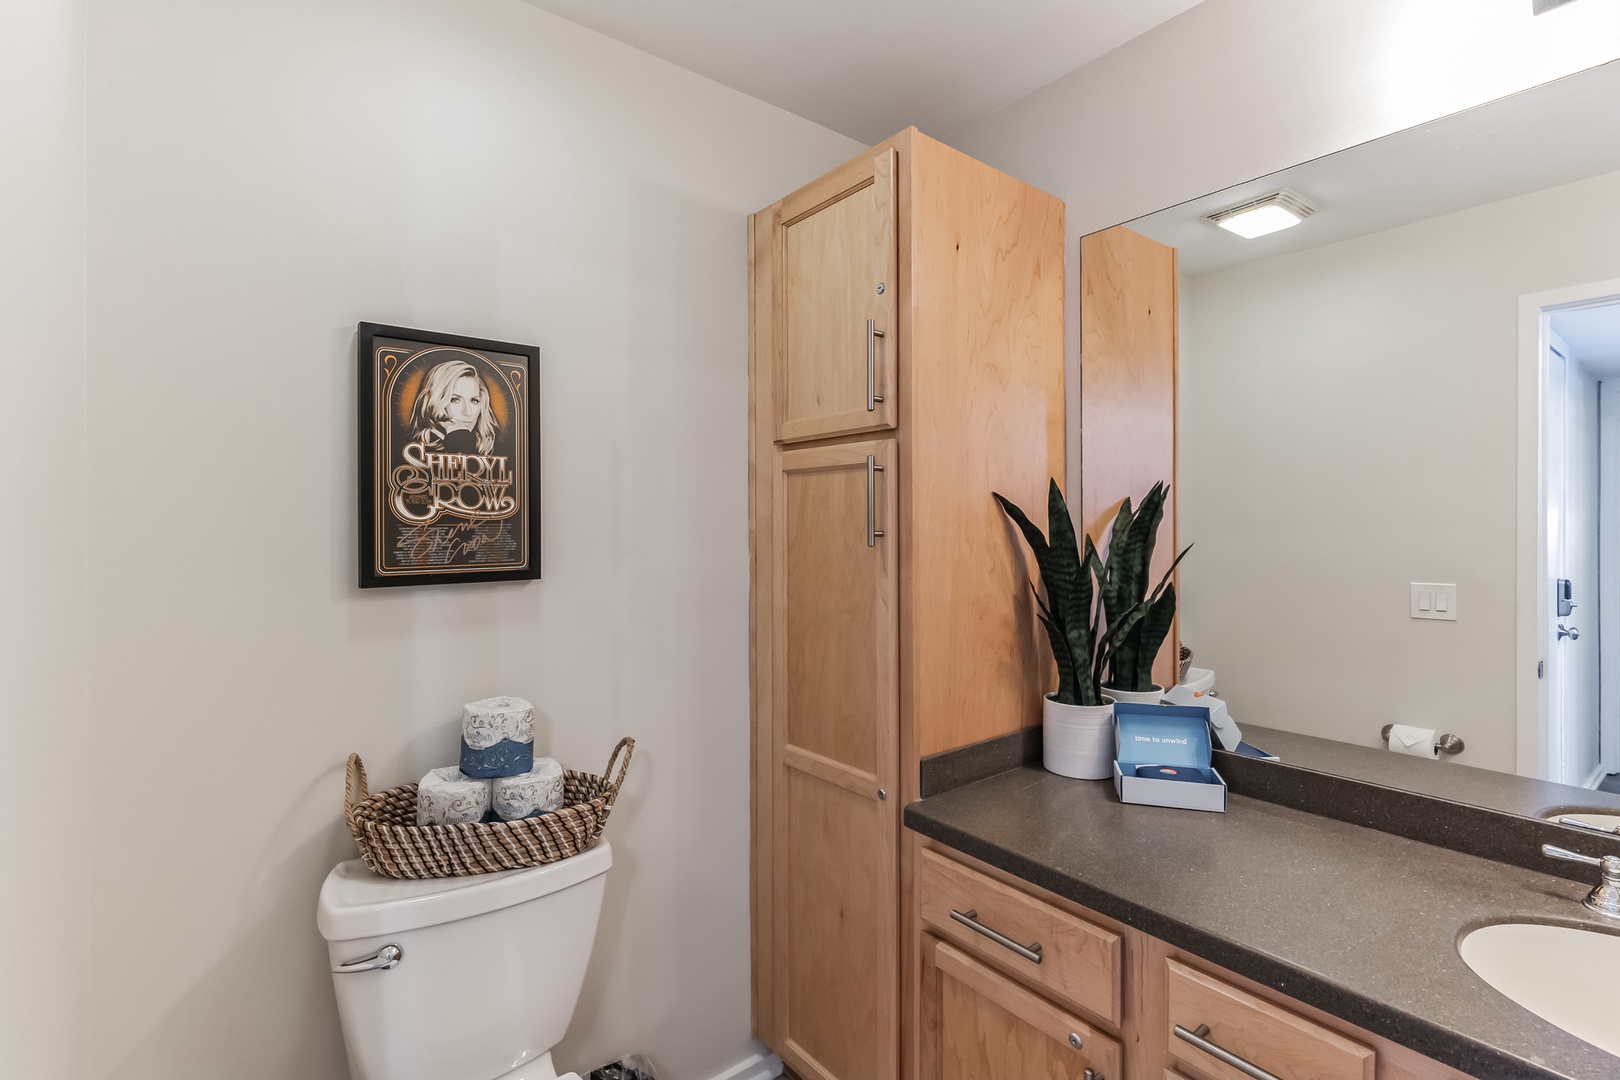 A convenient half bath is available, offering plenty of storage